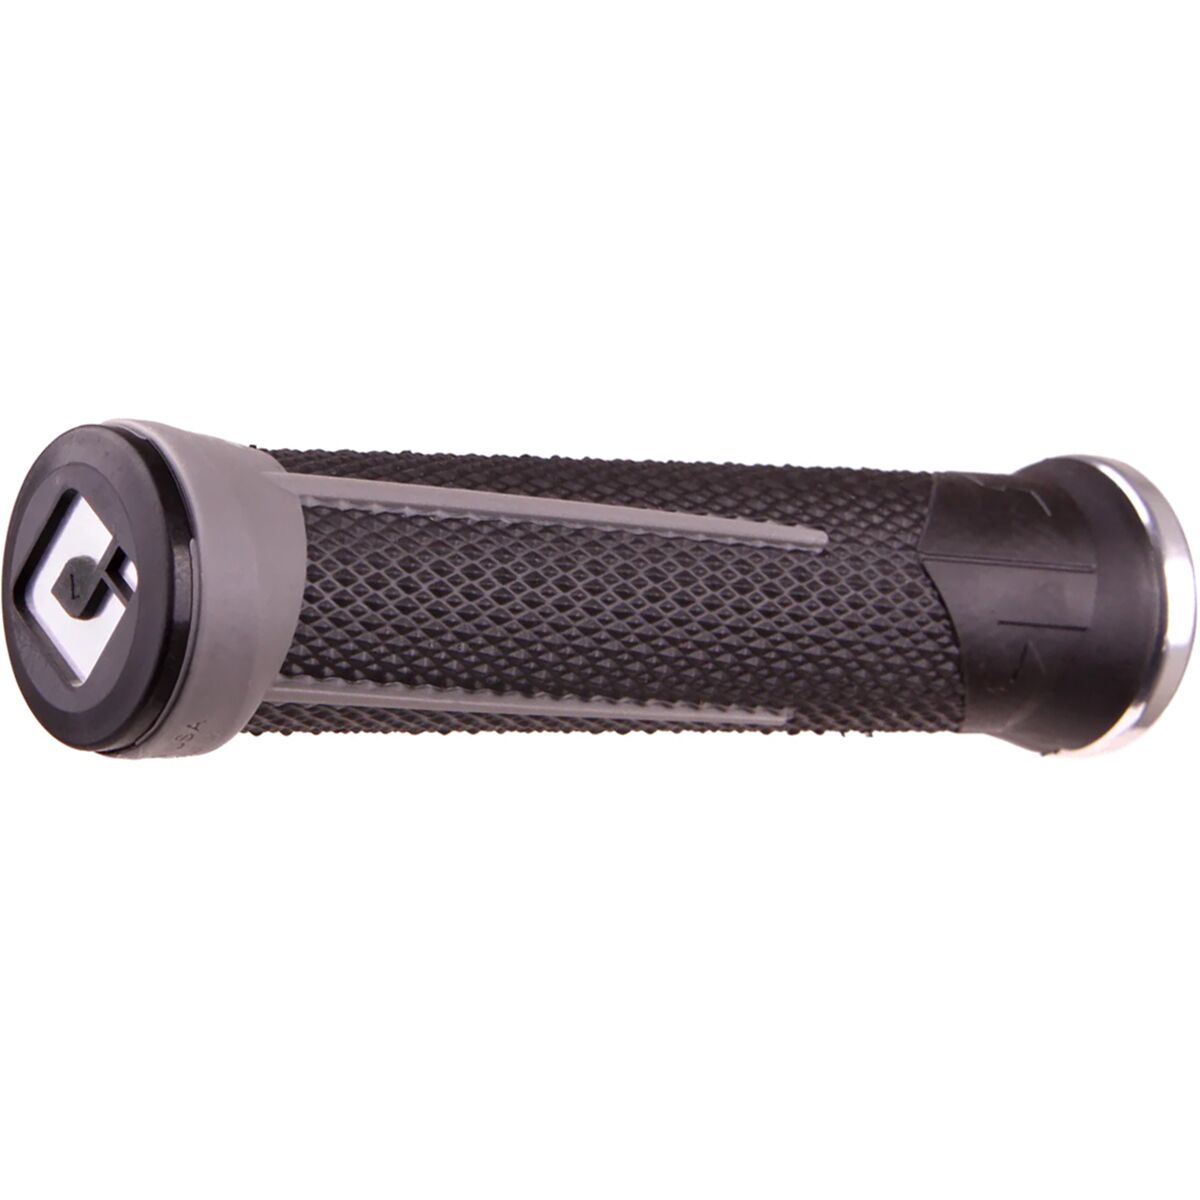 ODI AG-1 Aaron Gwin Lock-On Grips Black/Graphite, One Size